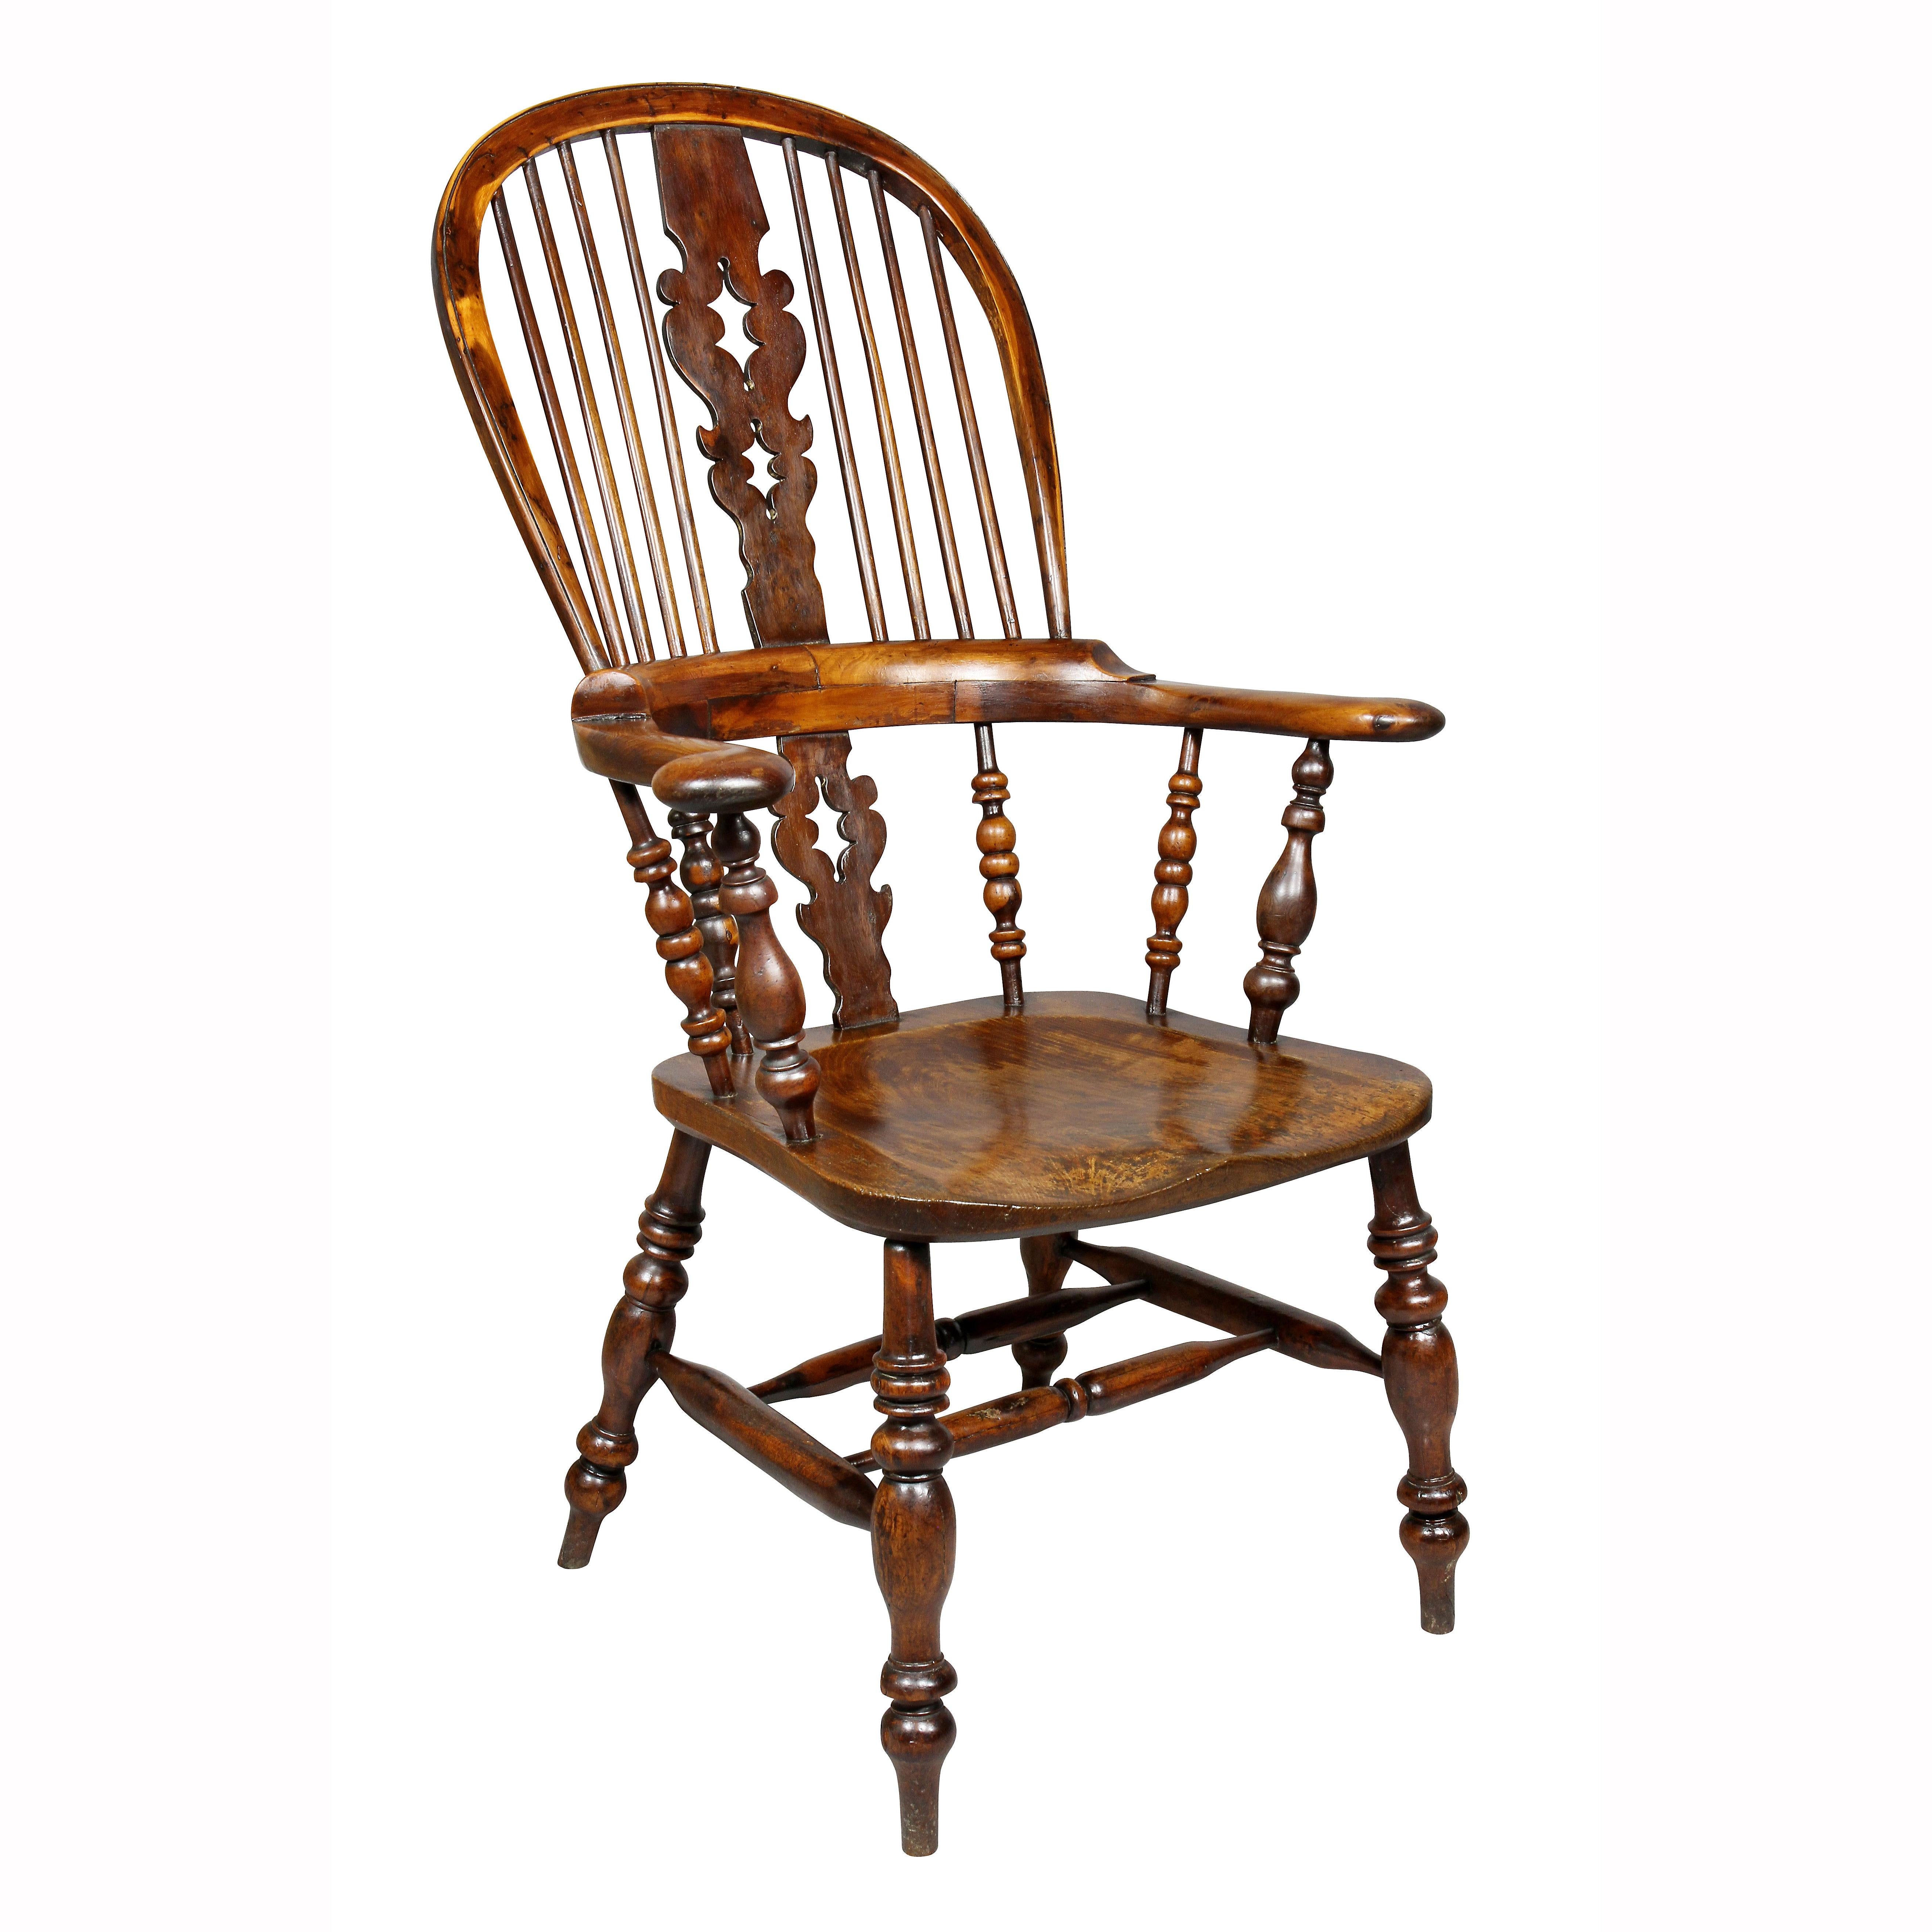 All with arched backs with central tree cutout splat, shaped solid wood seat raised on turned legs and stretchers.